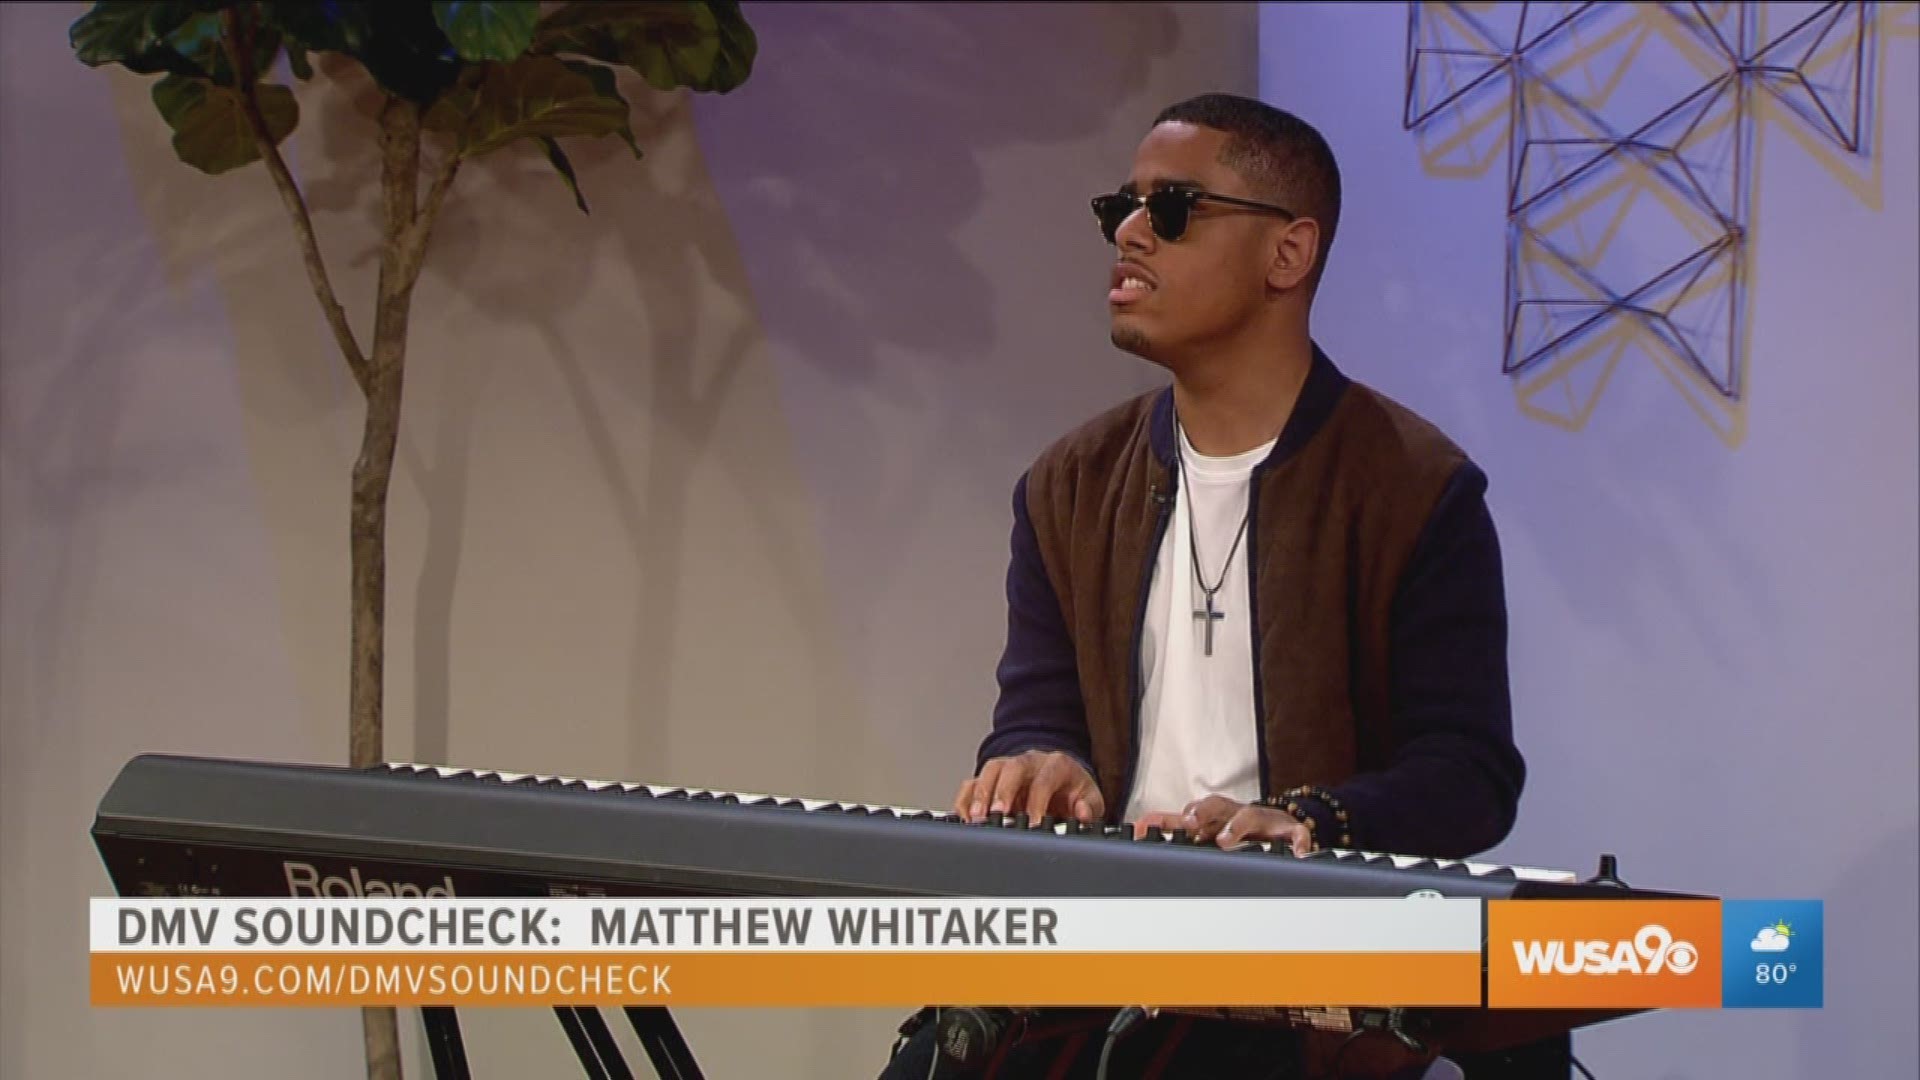 Matthew Whitaker is only 18 years old and is already creating strides in the jazz music world. From opening up for Stevie Wonder at the Apollo at only 10 years old to becoming the first blind student to attend Guillard, the jazz piano player is taking the world by storm. Whitaker performs his original song, "Emotions" from his new record "Now Hear This". This segment was sponsored by the DC Office of Cable Television, Film, Music & Entertainment.